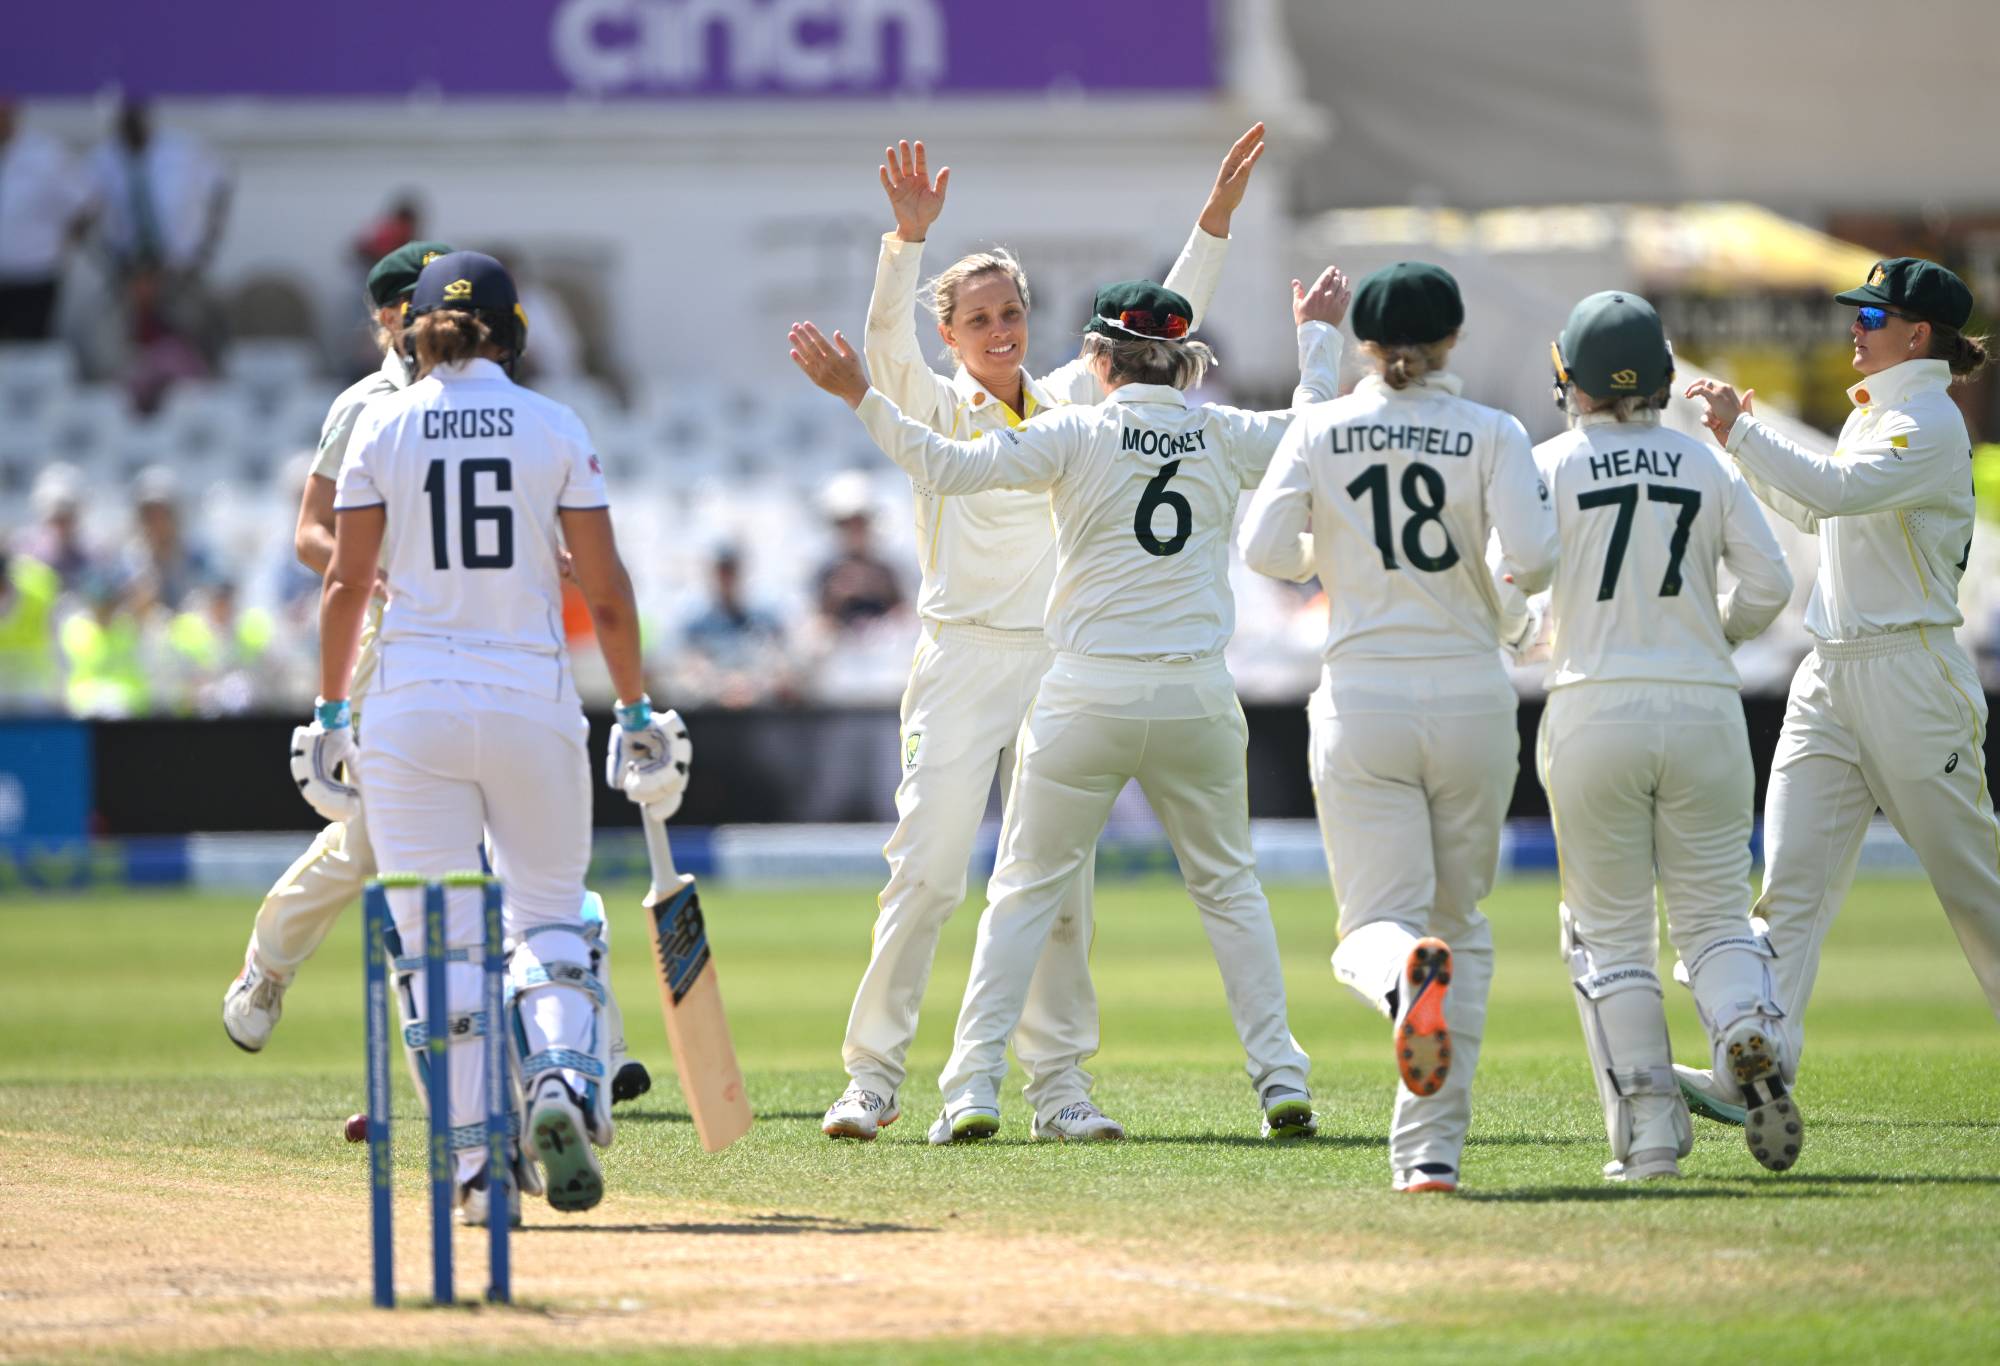 NOTTINGHAM, ENGLAND - JUNE 26: Australia bowler Ashleigh Gardner is congratulated by team mates after taking the wicket of Kate Cross during day five of the LV= Insurance Women's Ashes Test match between England and Australia at Trent Bridge on June 26, 2023 in Nottingham, England. (Photo by Stu Forster/Getty Images)